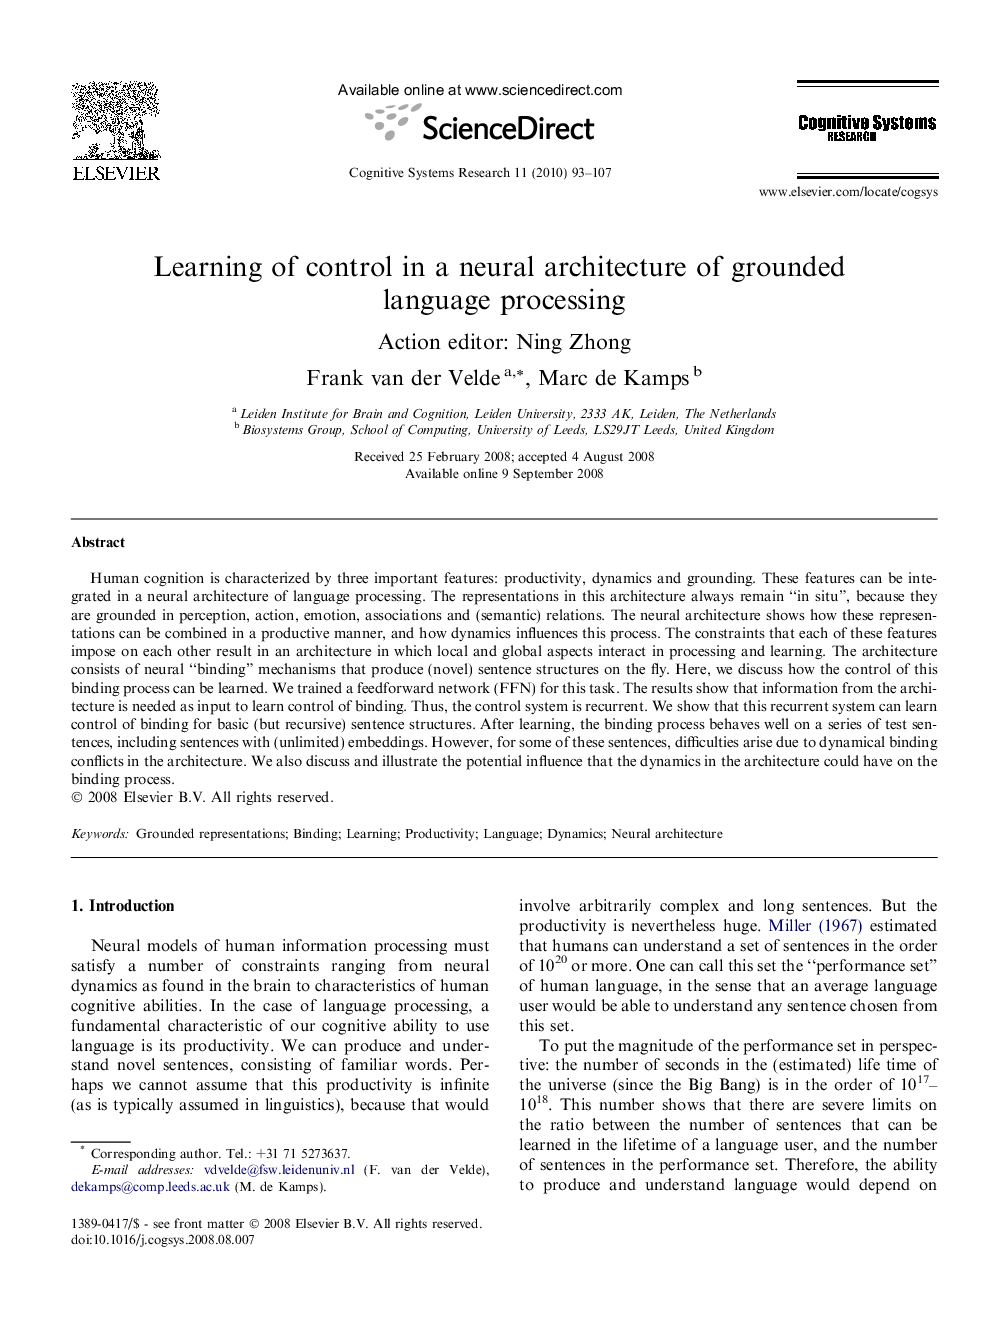 Learning of control in a neural architecture of grounded language processing